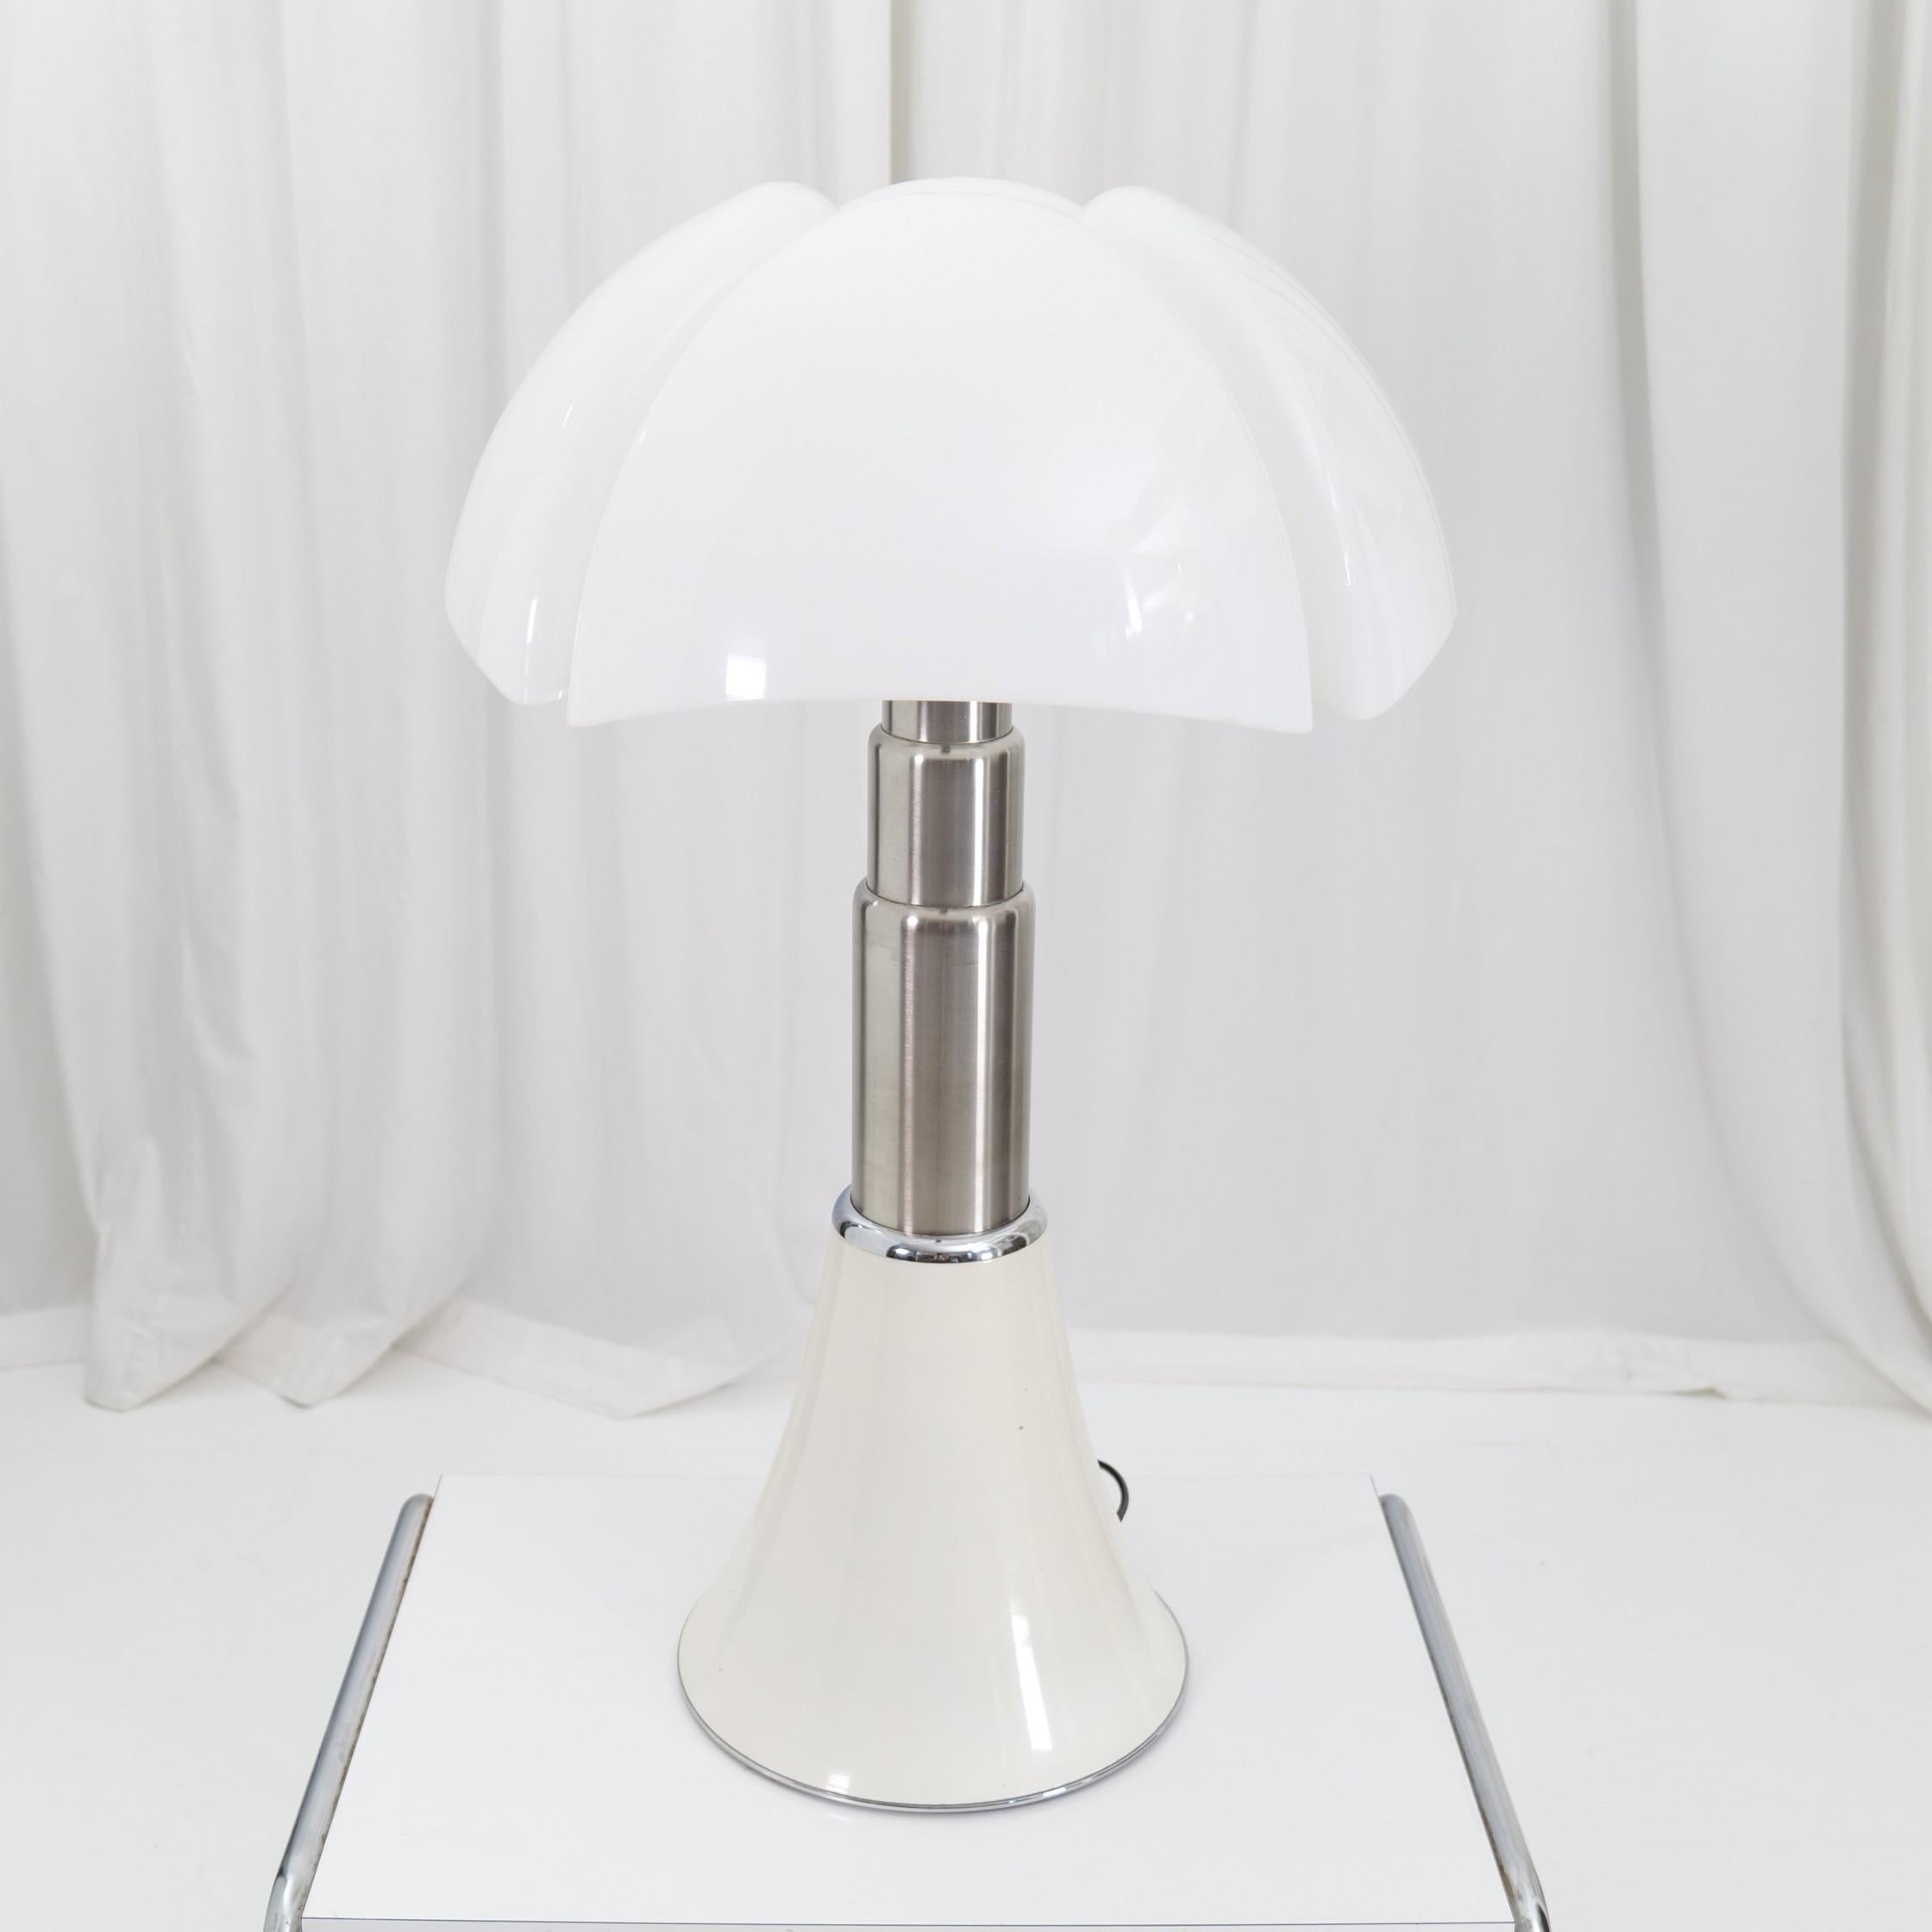 Early Vintage Pipistrello Lamp by Gae Aulenti for Martinelli Luce 2